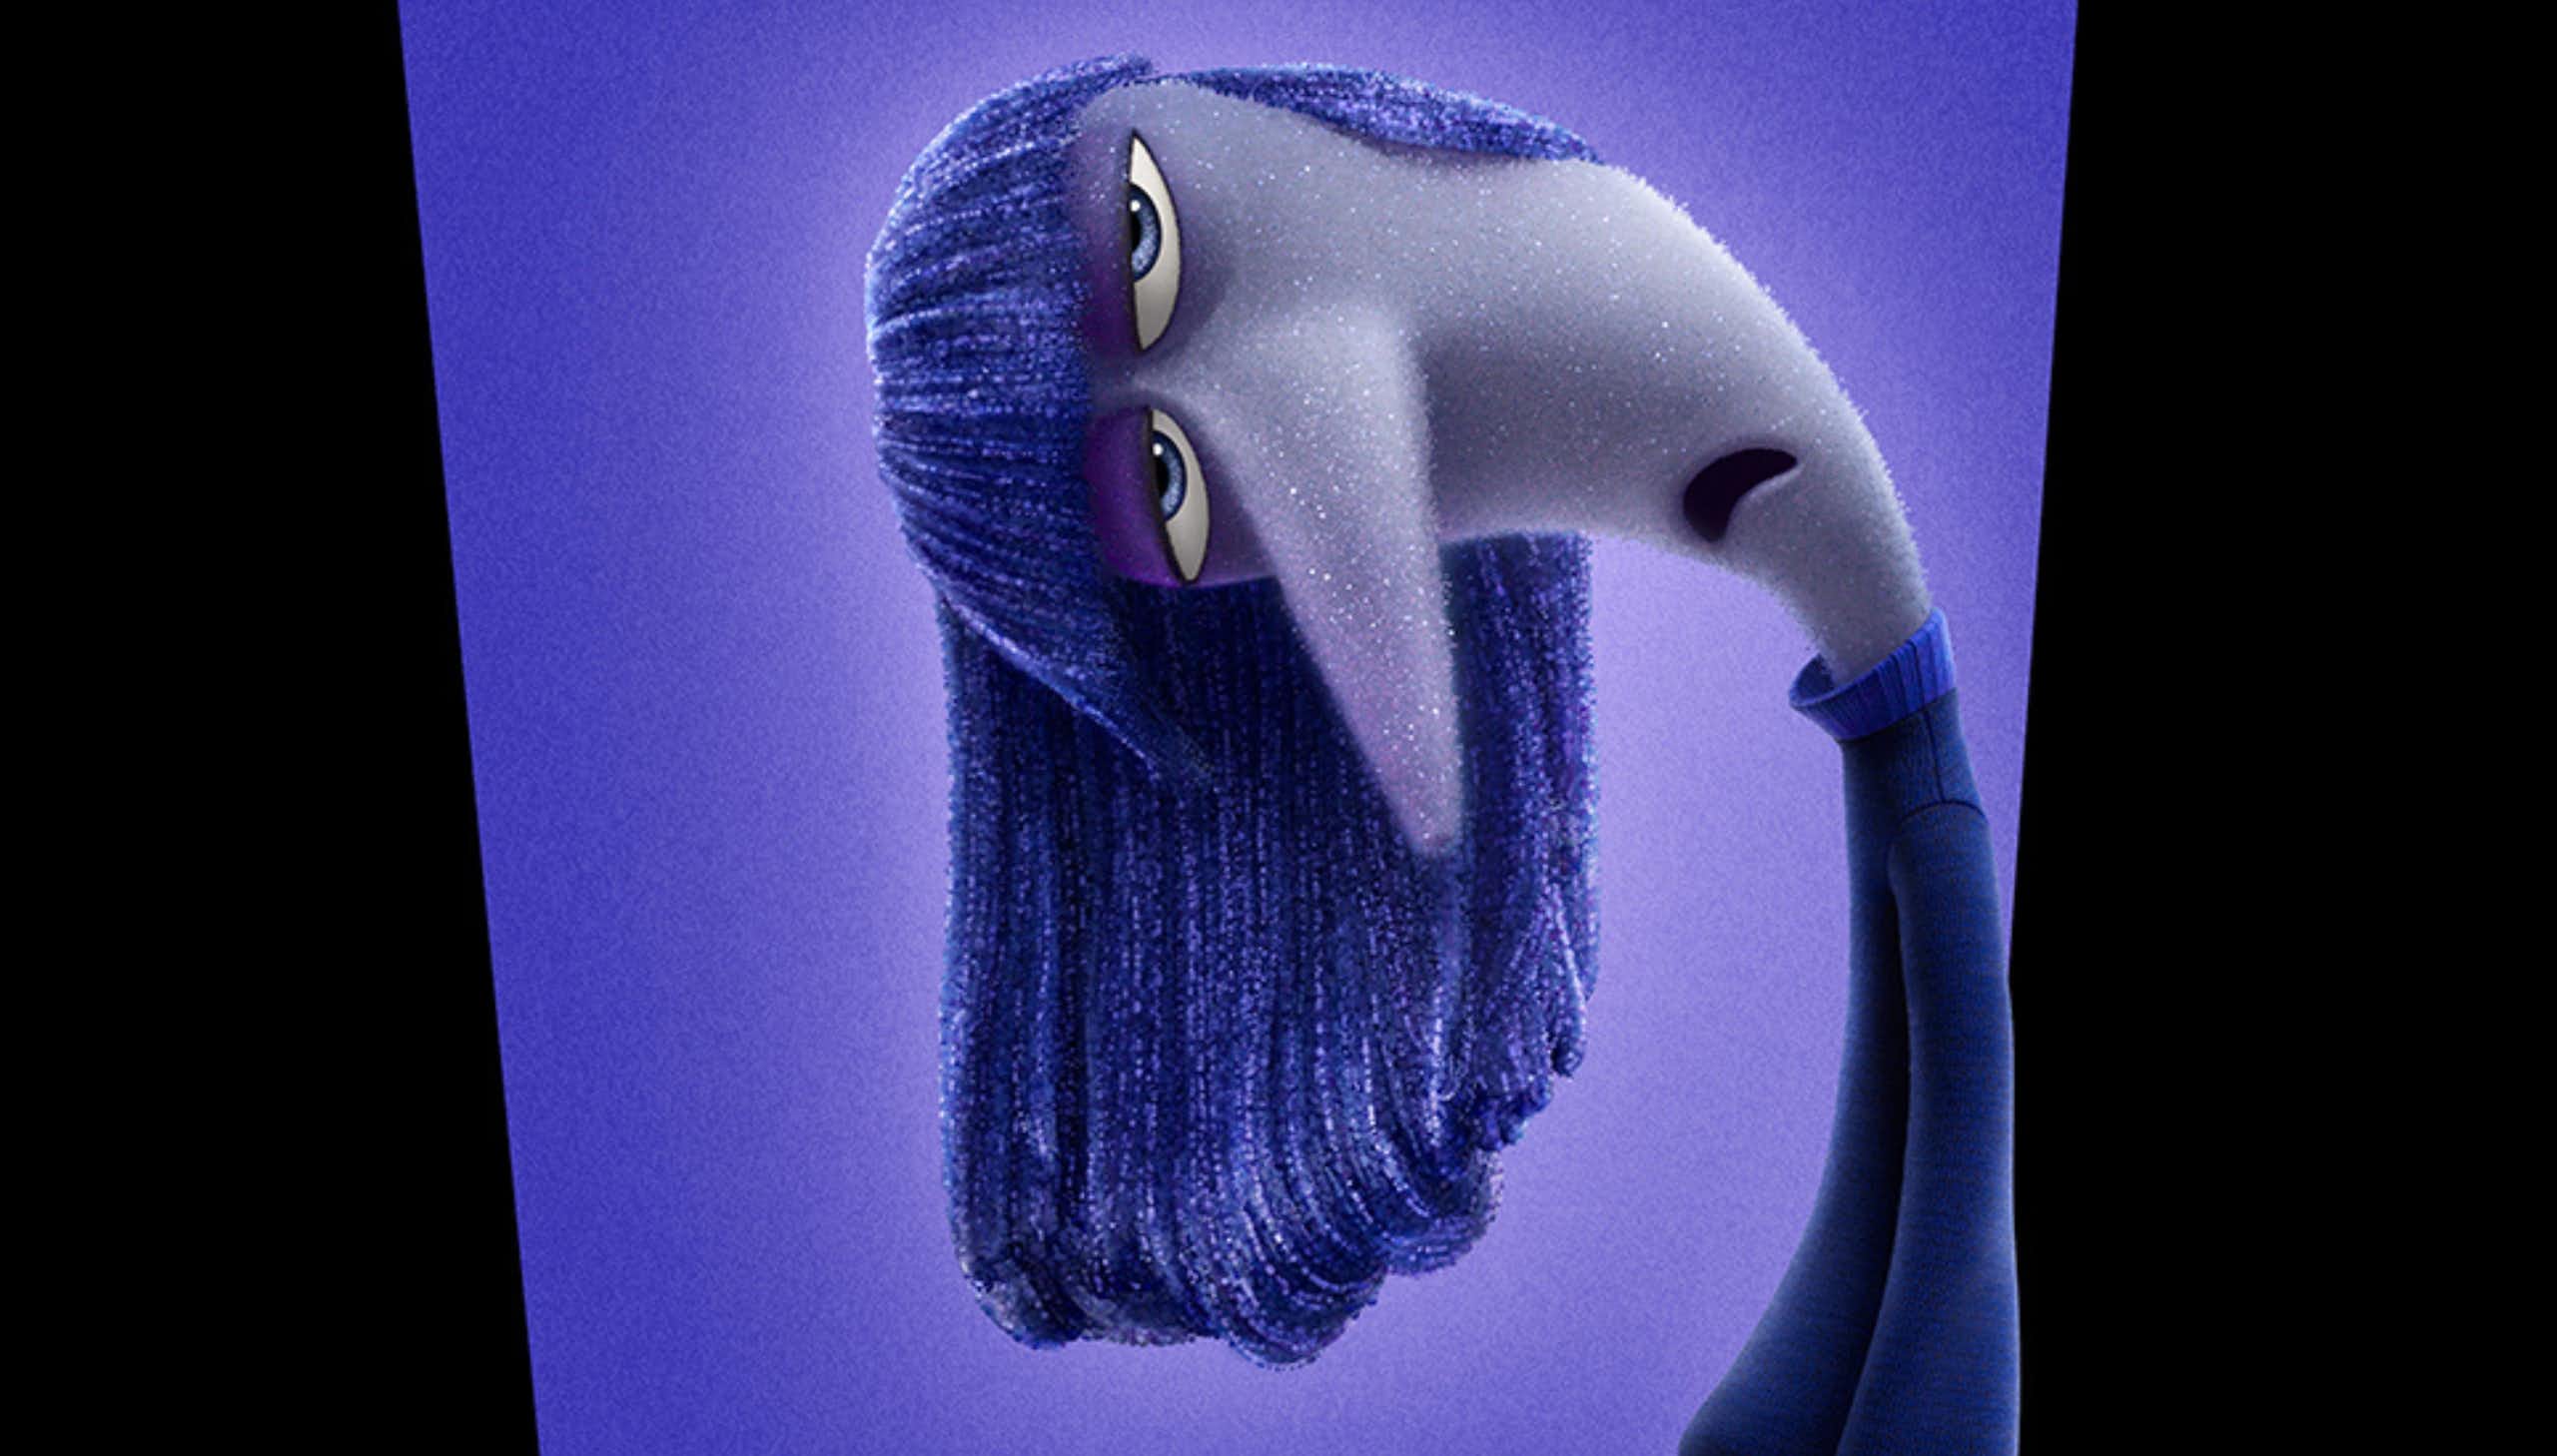 The character of ennui, leaning to one side with long purple hair